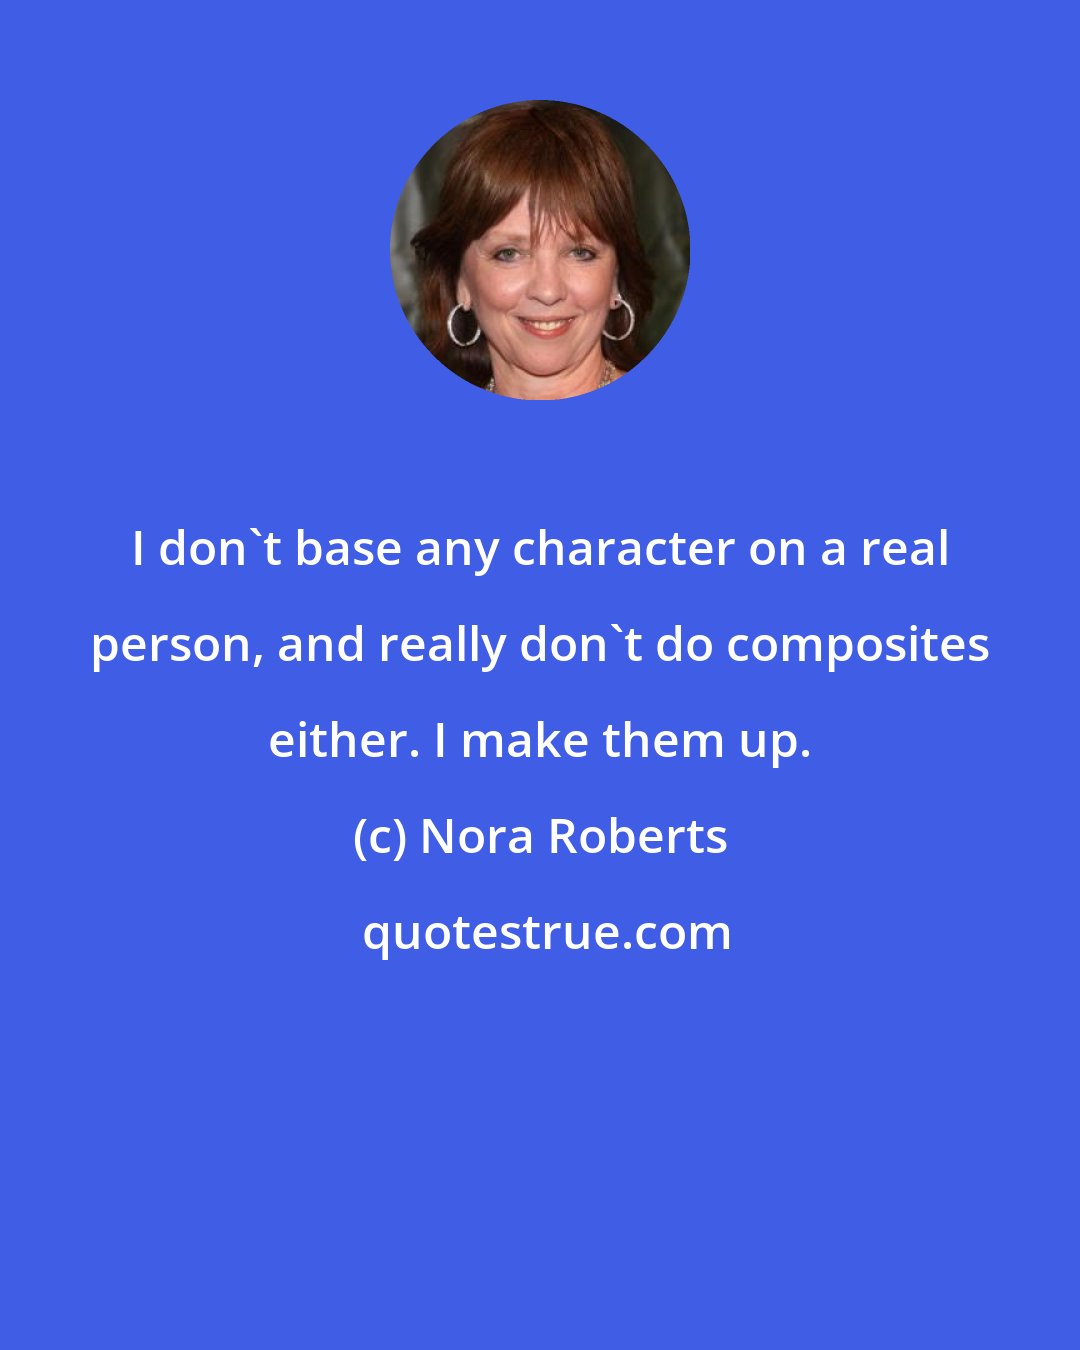 Nora Roberts: I don't base any character on a real person, and really don't do composites either. I make them up.